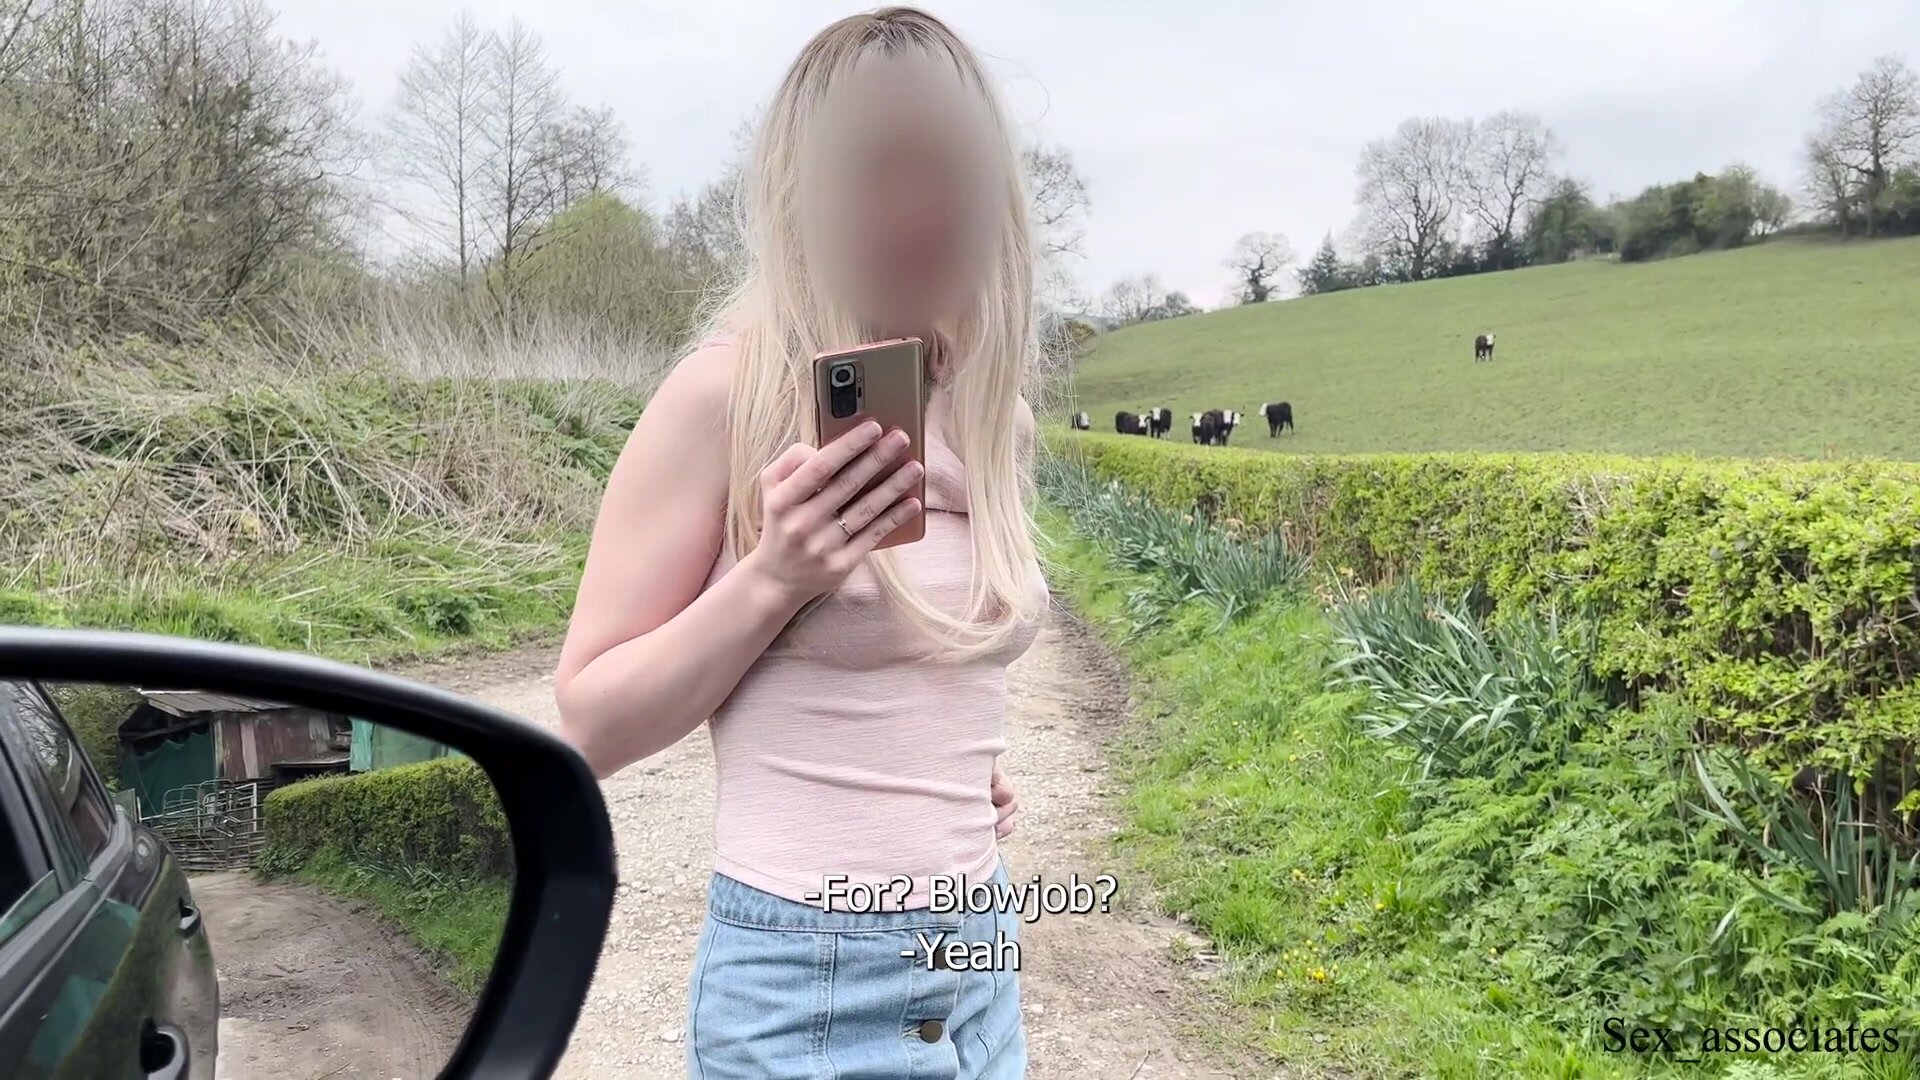 Sex_Associates - Dogging with a British countryside prostitute. I paid her extra £50 to fuck a stranger